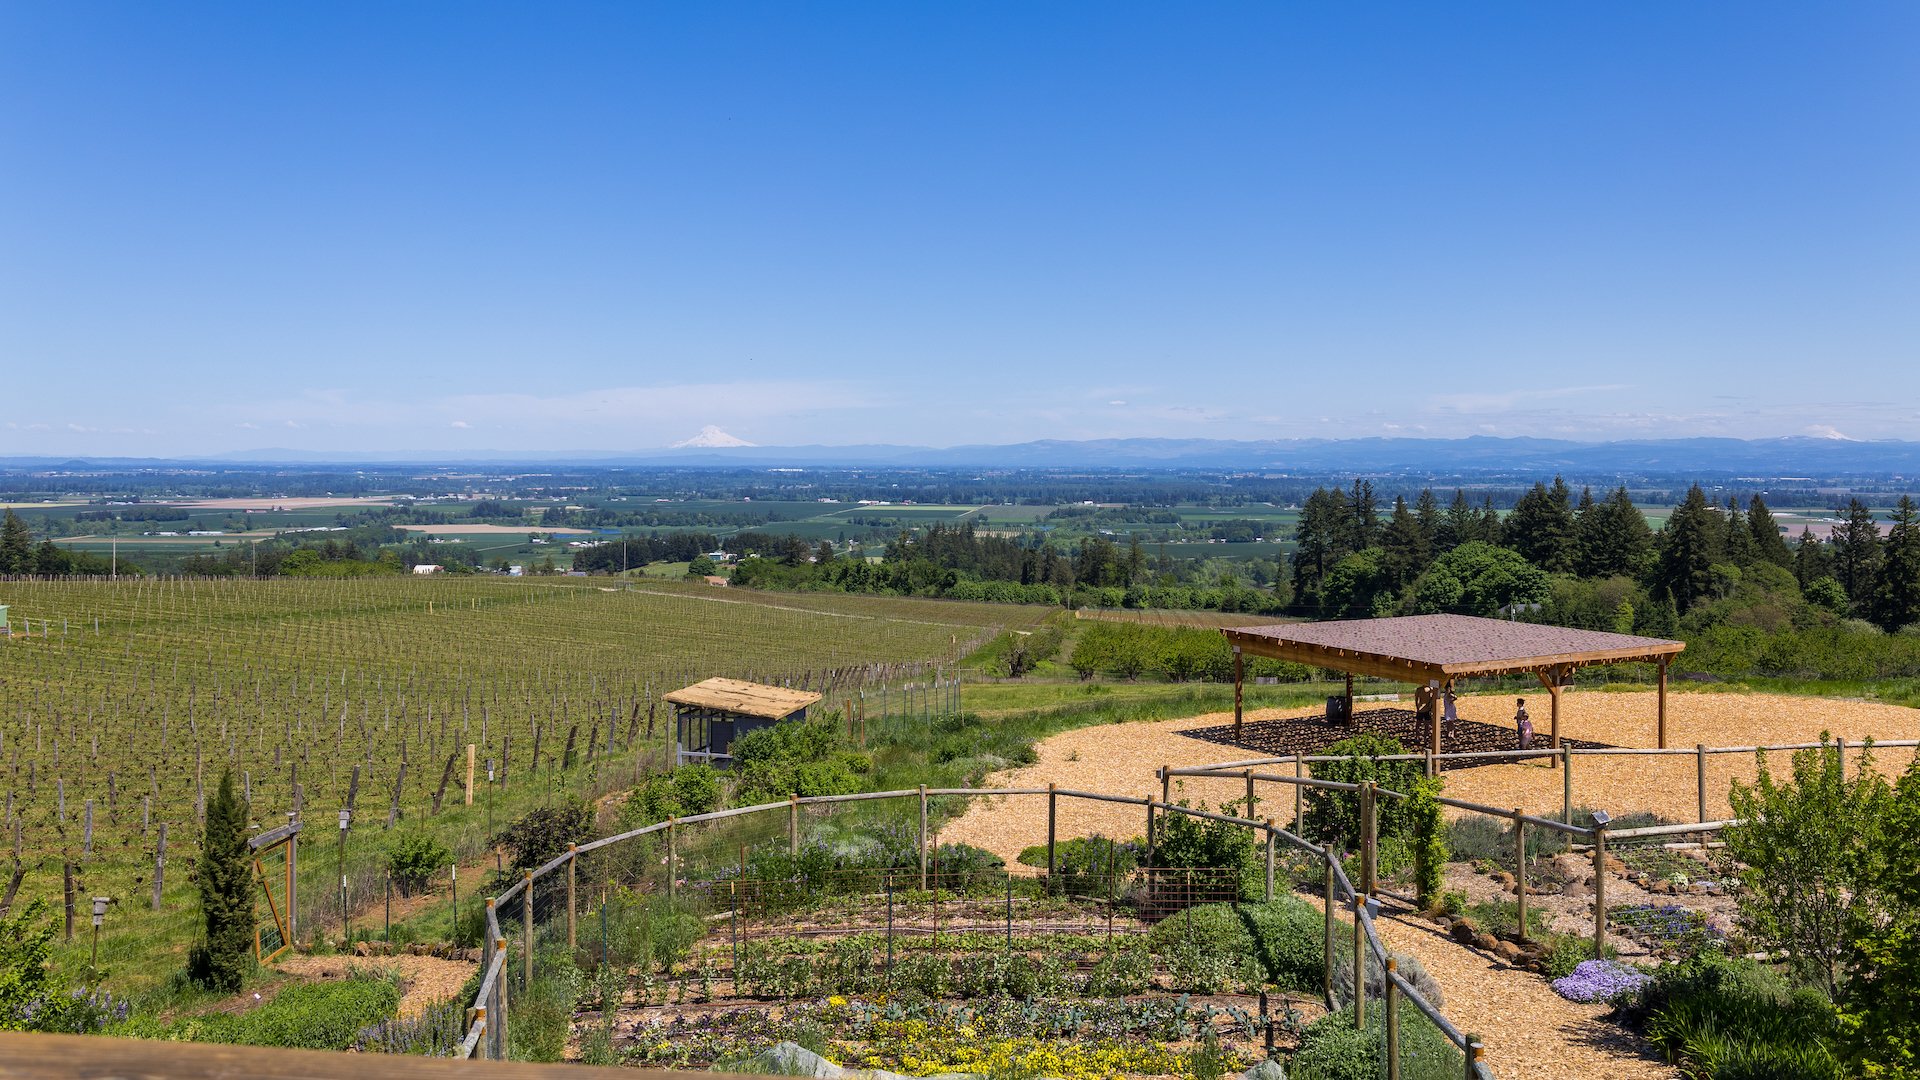  Sweeping views across the vineyard, with Mount Hood in the distance. 